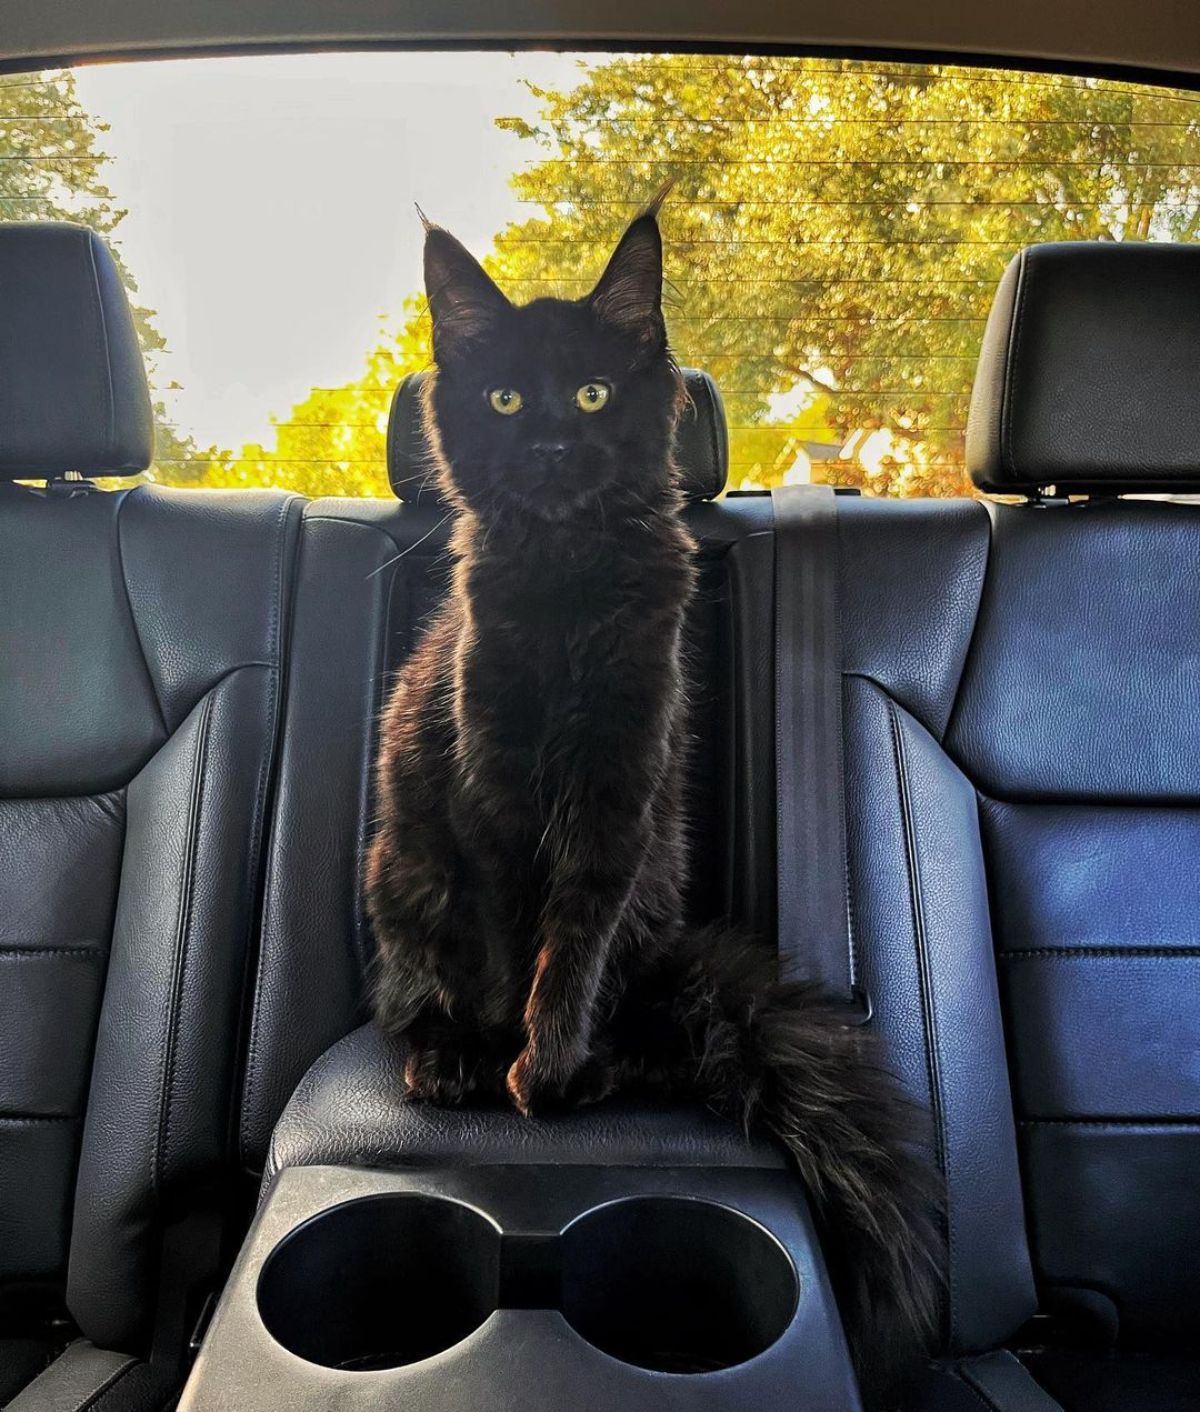 A beautiful black maine coon kitten sitting in a car.